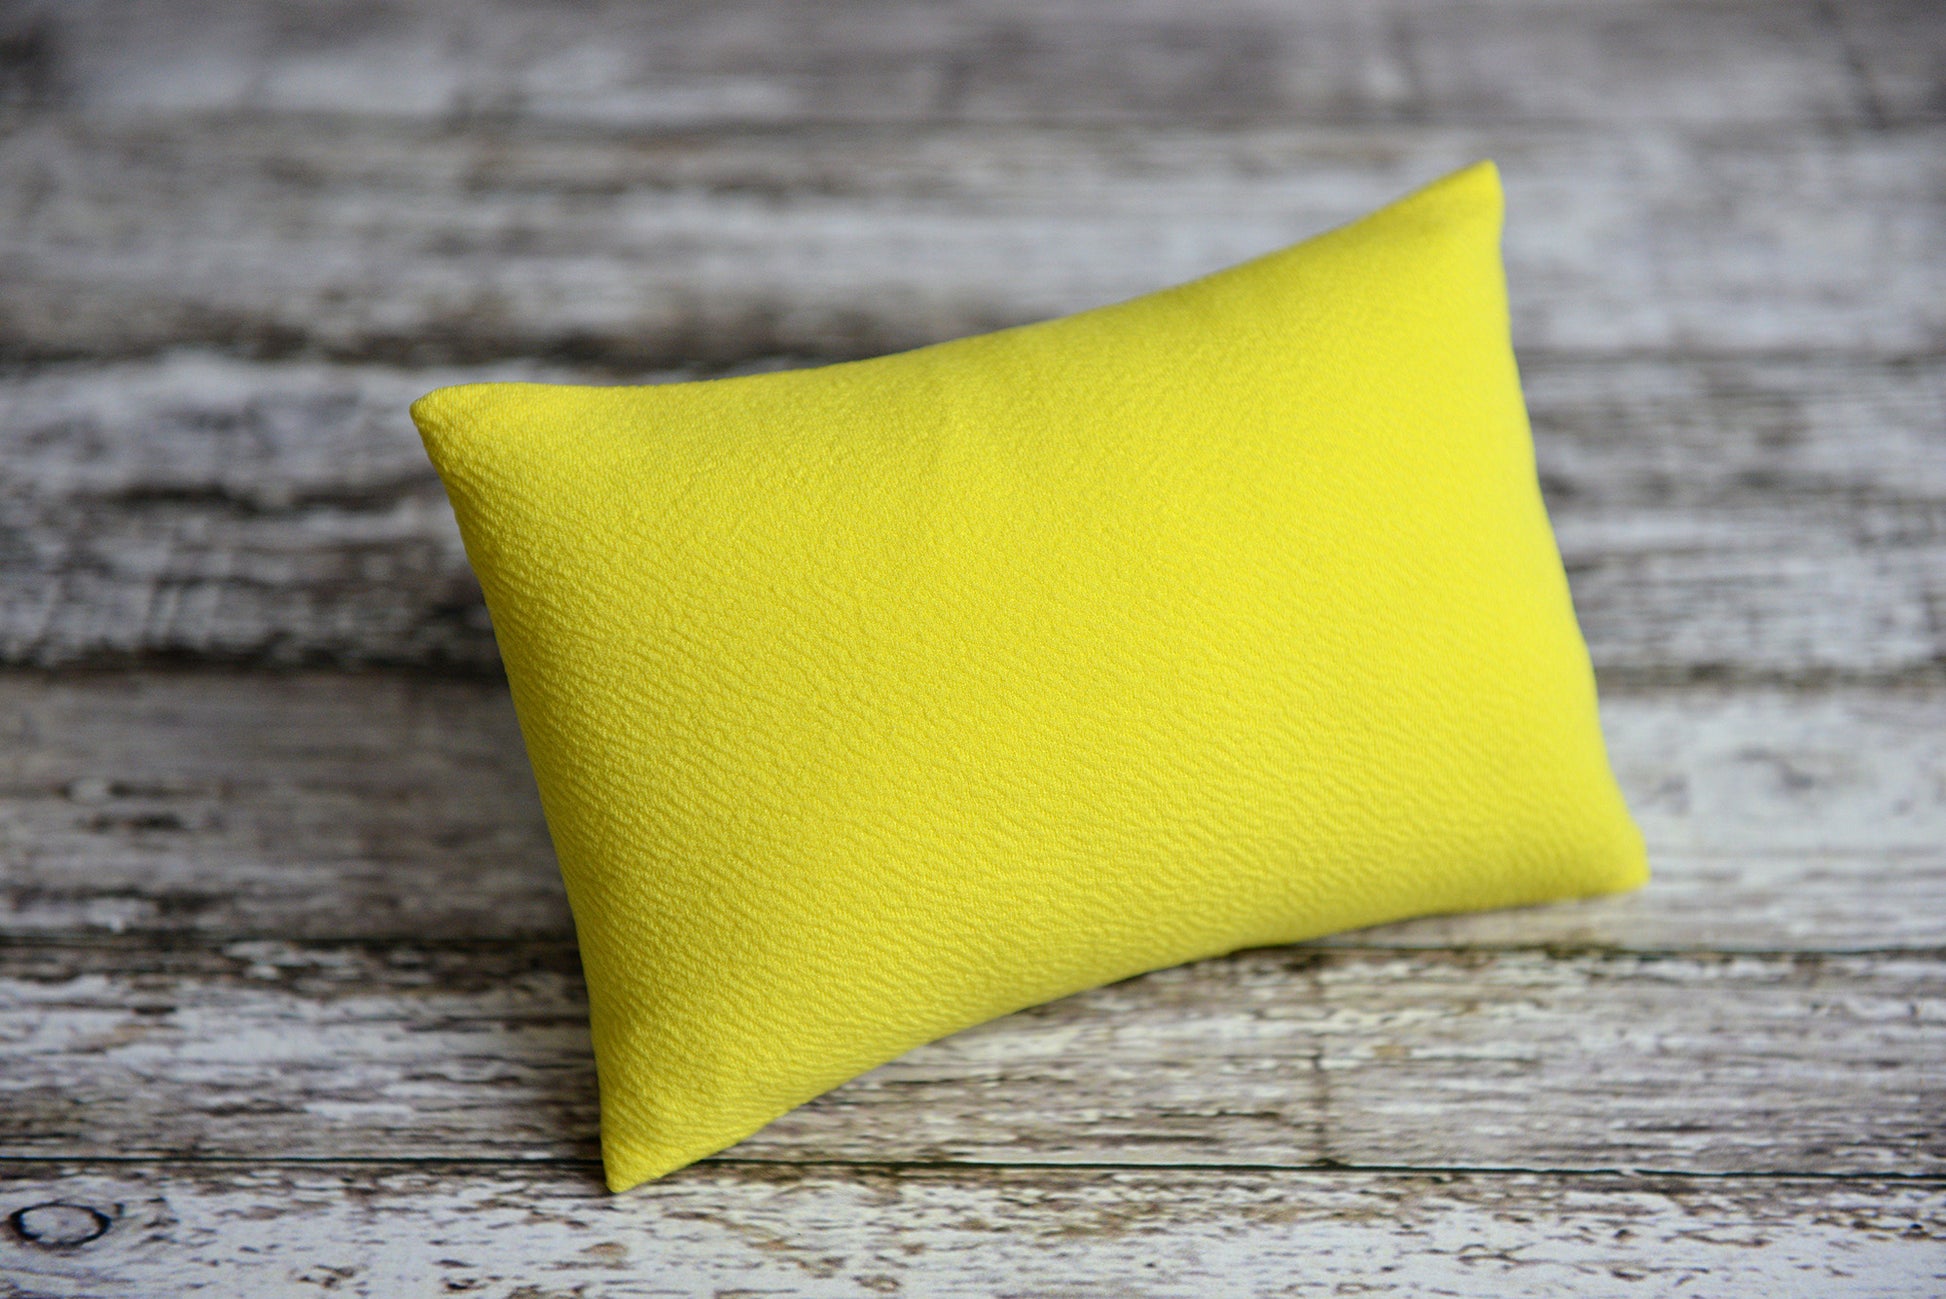 Mini Pillow with Cover - Textured - Yellow-Newborn Photography Props